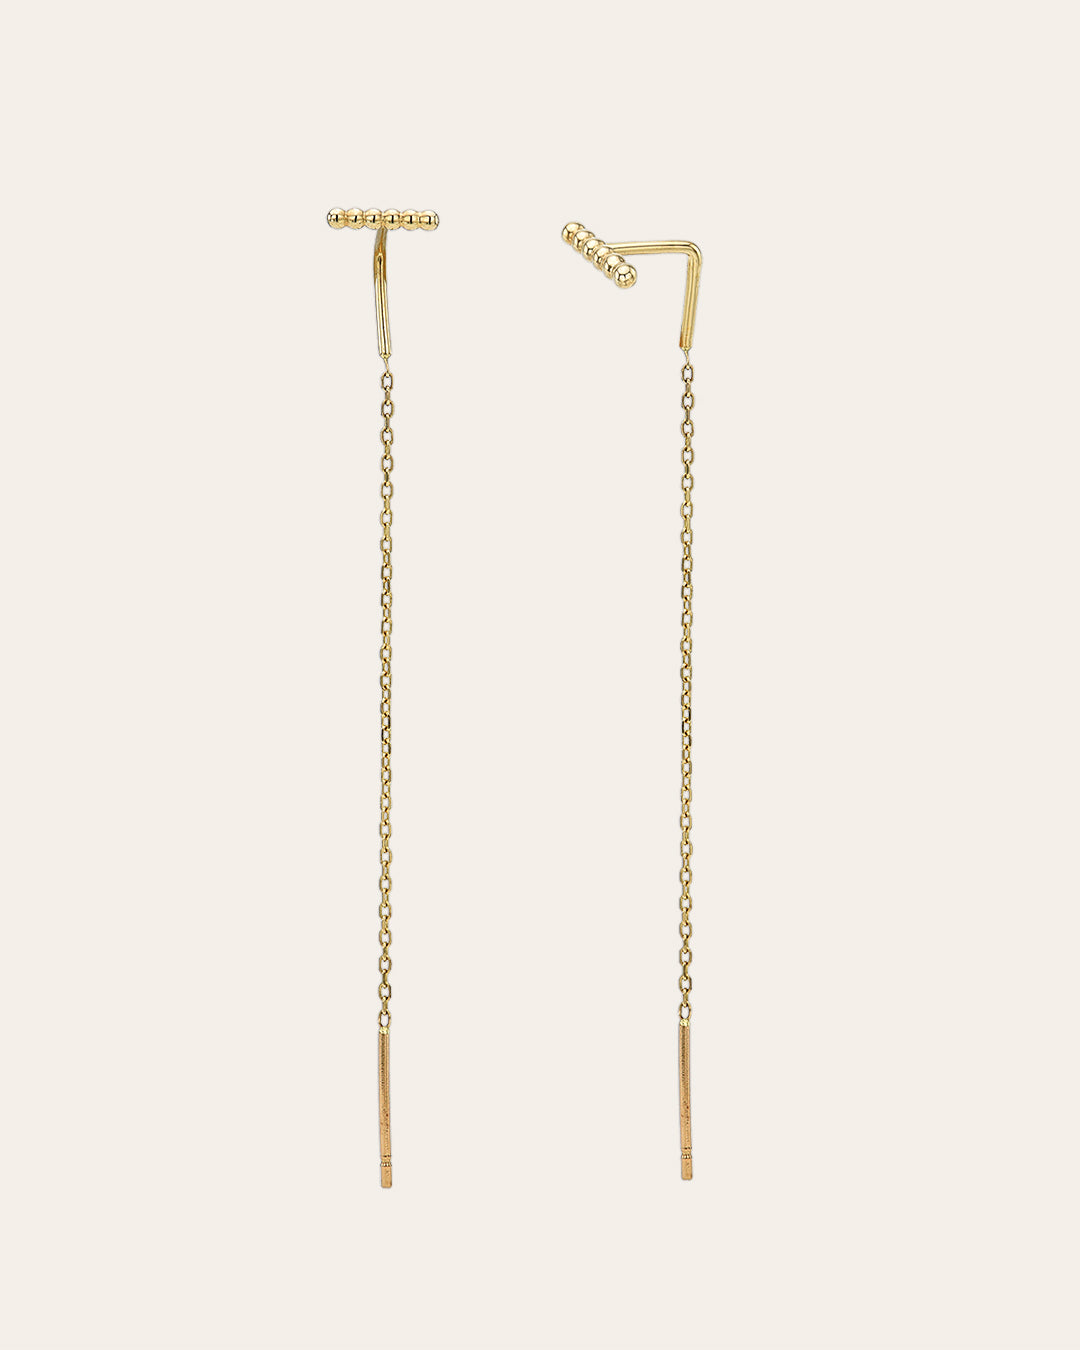 14k Gold Cable Link Threader Earrings